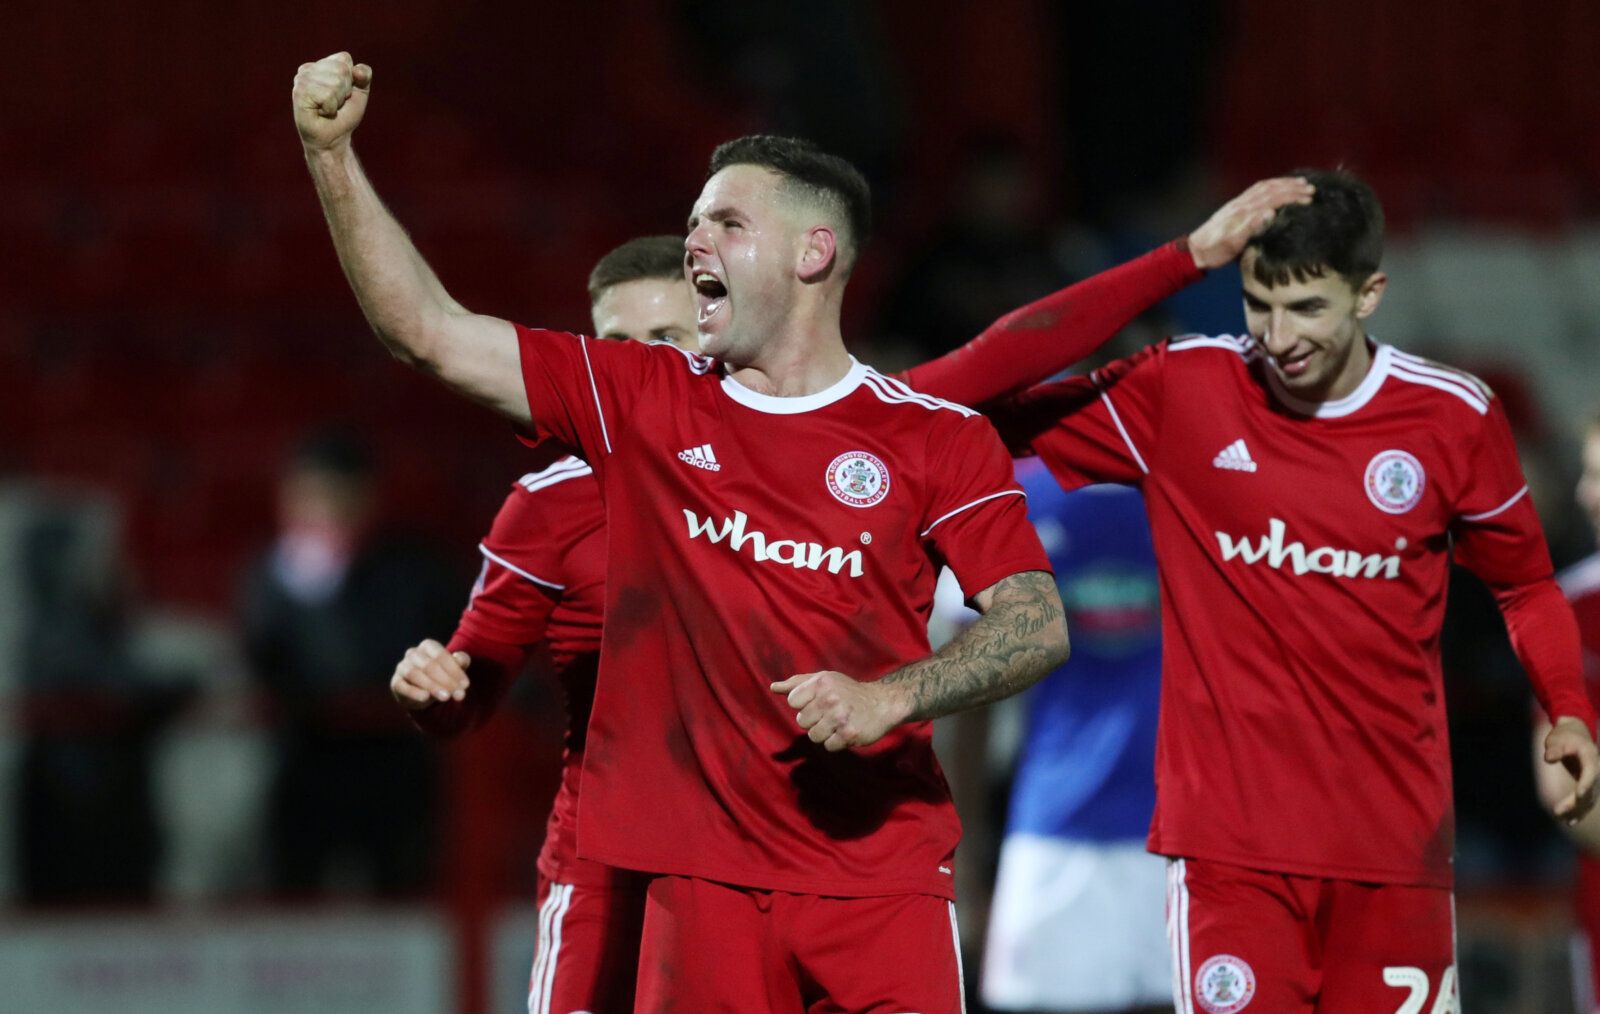 Soccer Football - FA Cup Third Round - Accrington Stanley v Ipswich Town - Wham Stadium, Accrington, Britain - January 5, 2019  Accrington Stanley's Billy Kee celebrates after the match with team mates           Action Images/John Clifton